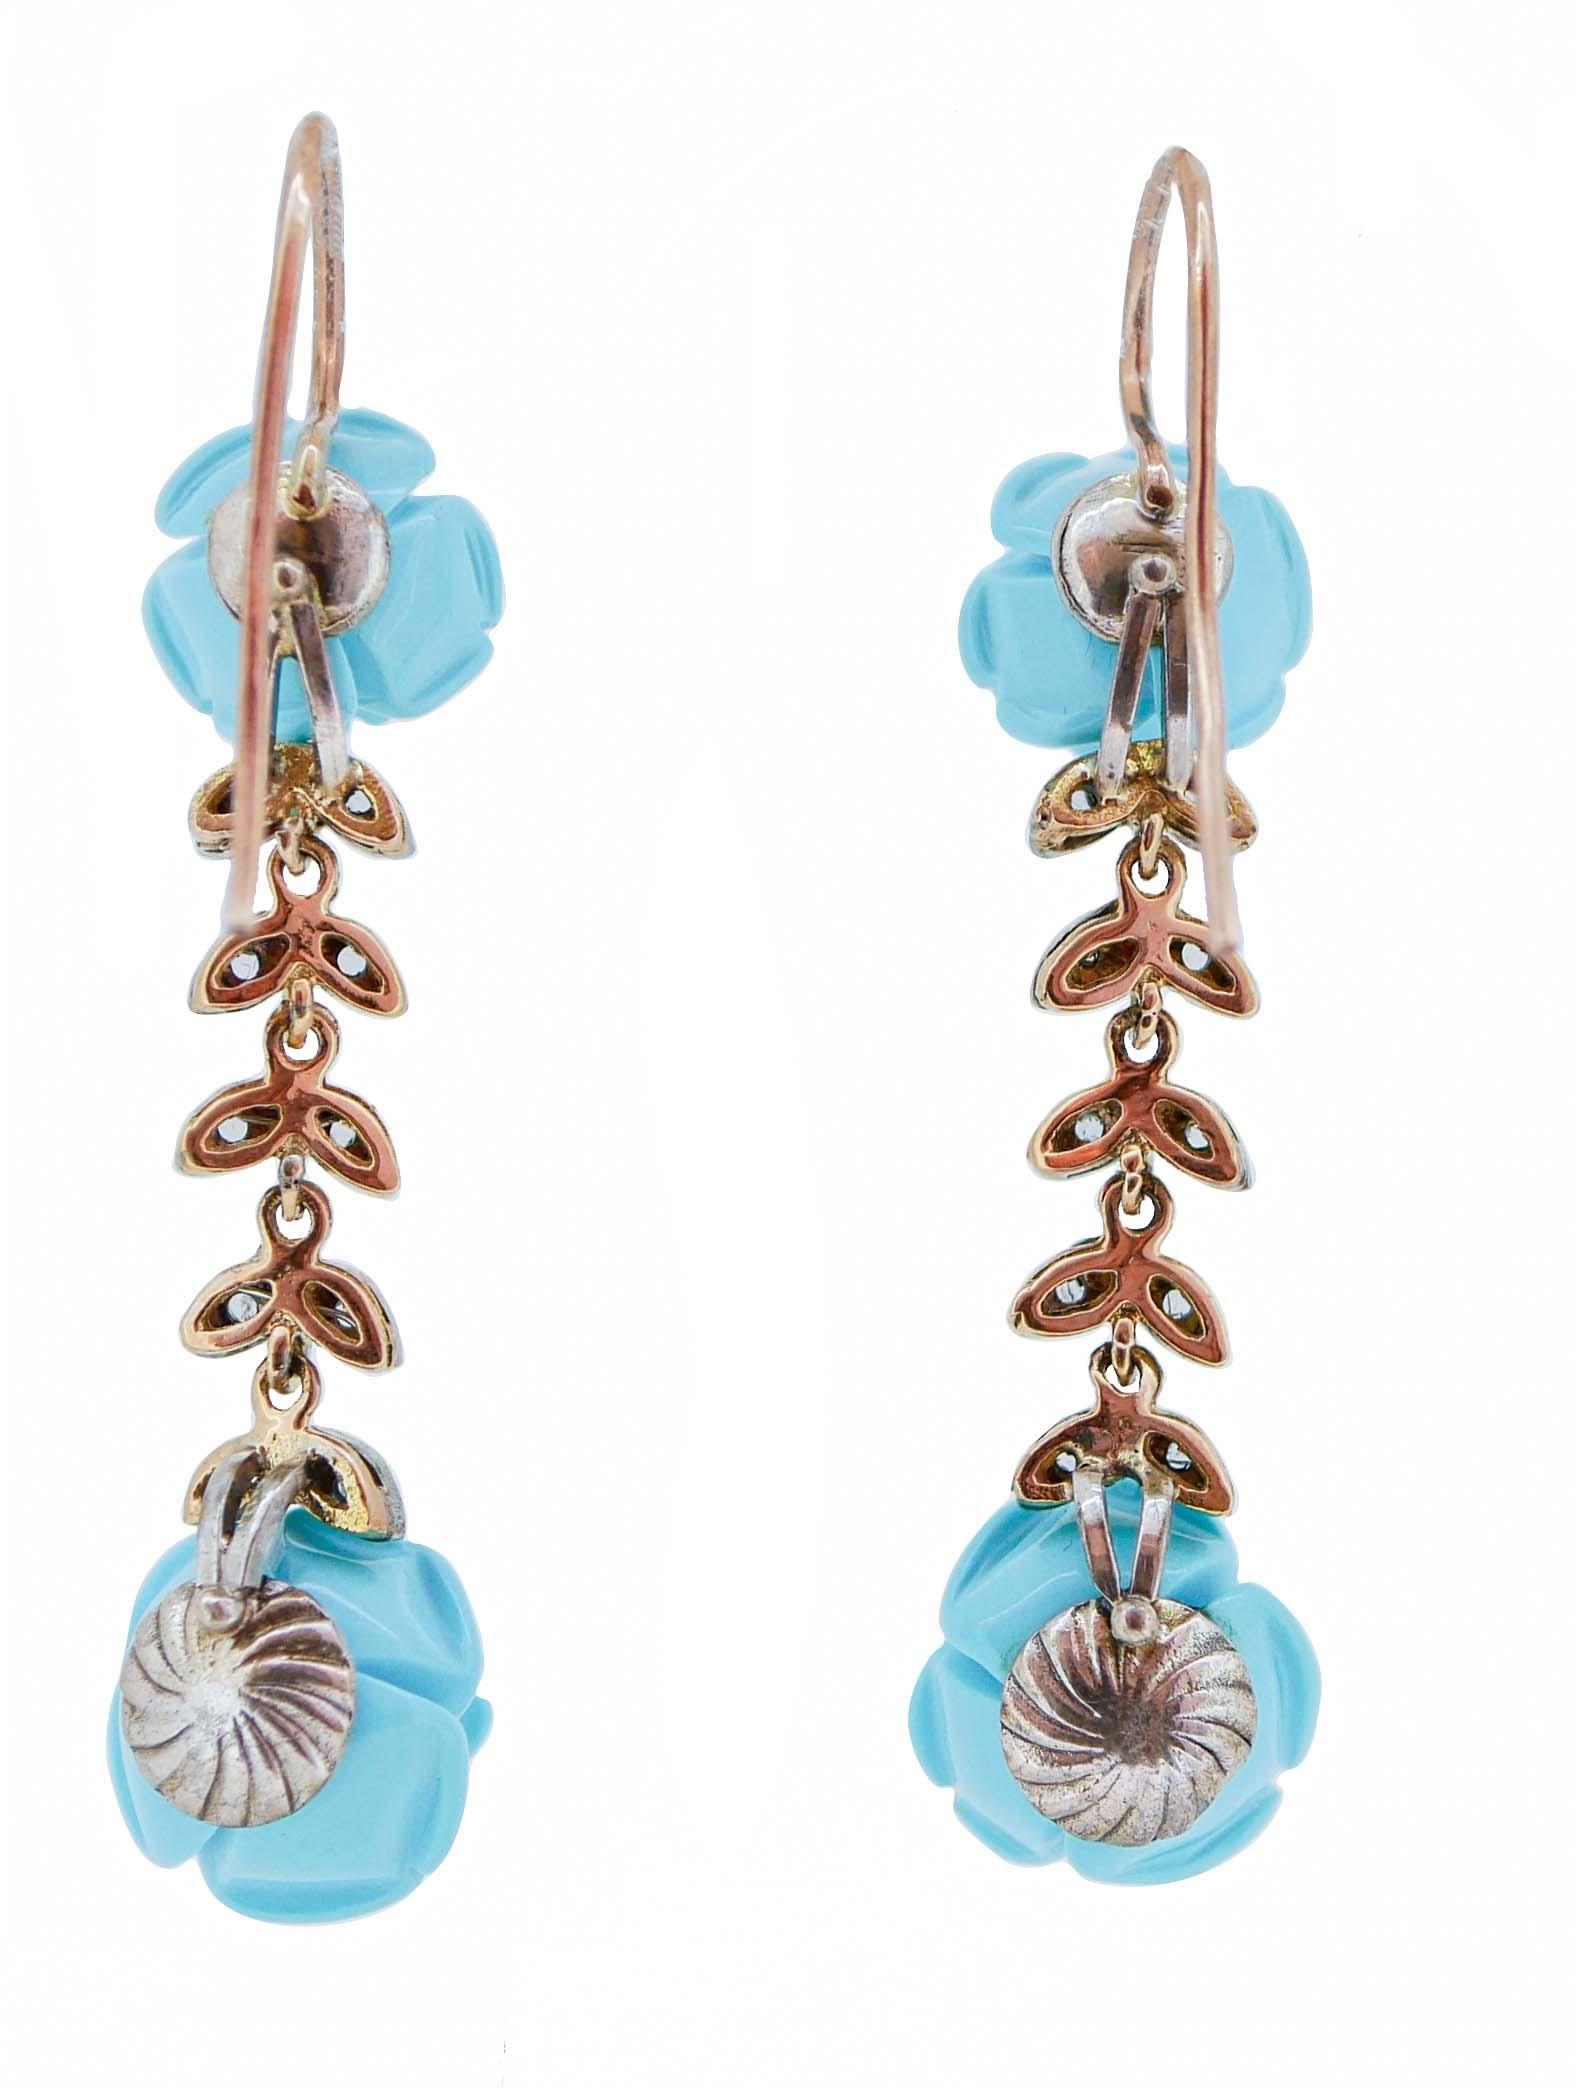 Retro Turquoise, Diamonds, Rose Gold and Silver Retrò Earrings. For Sale